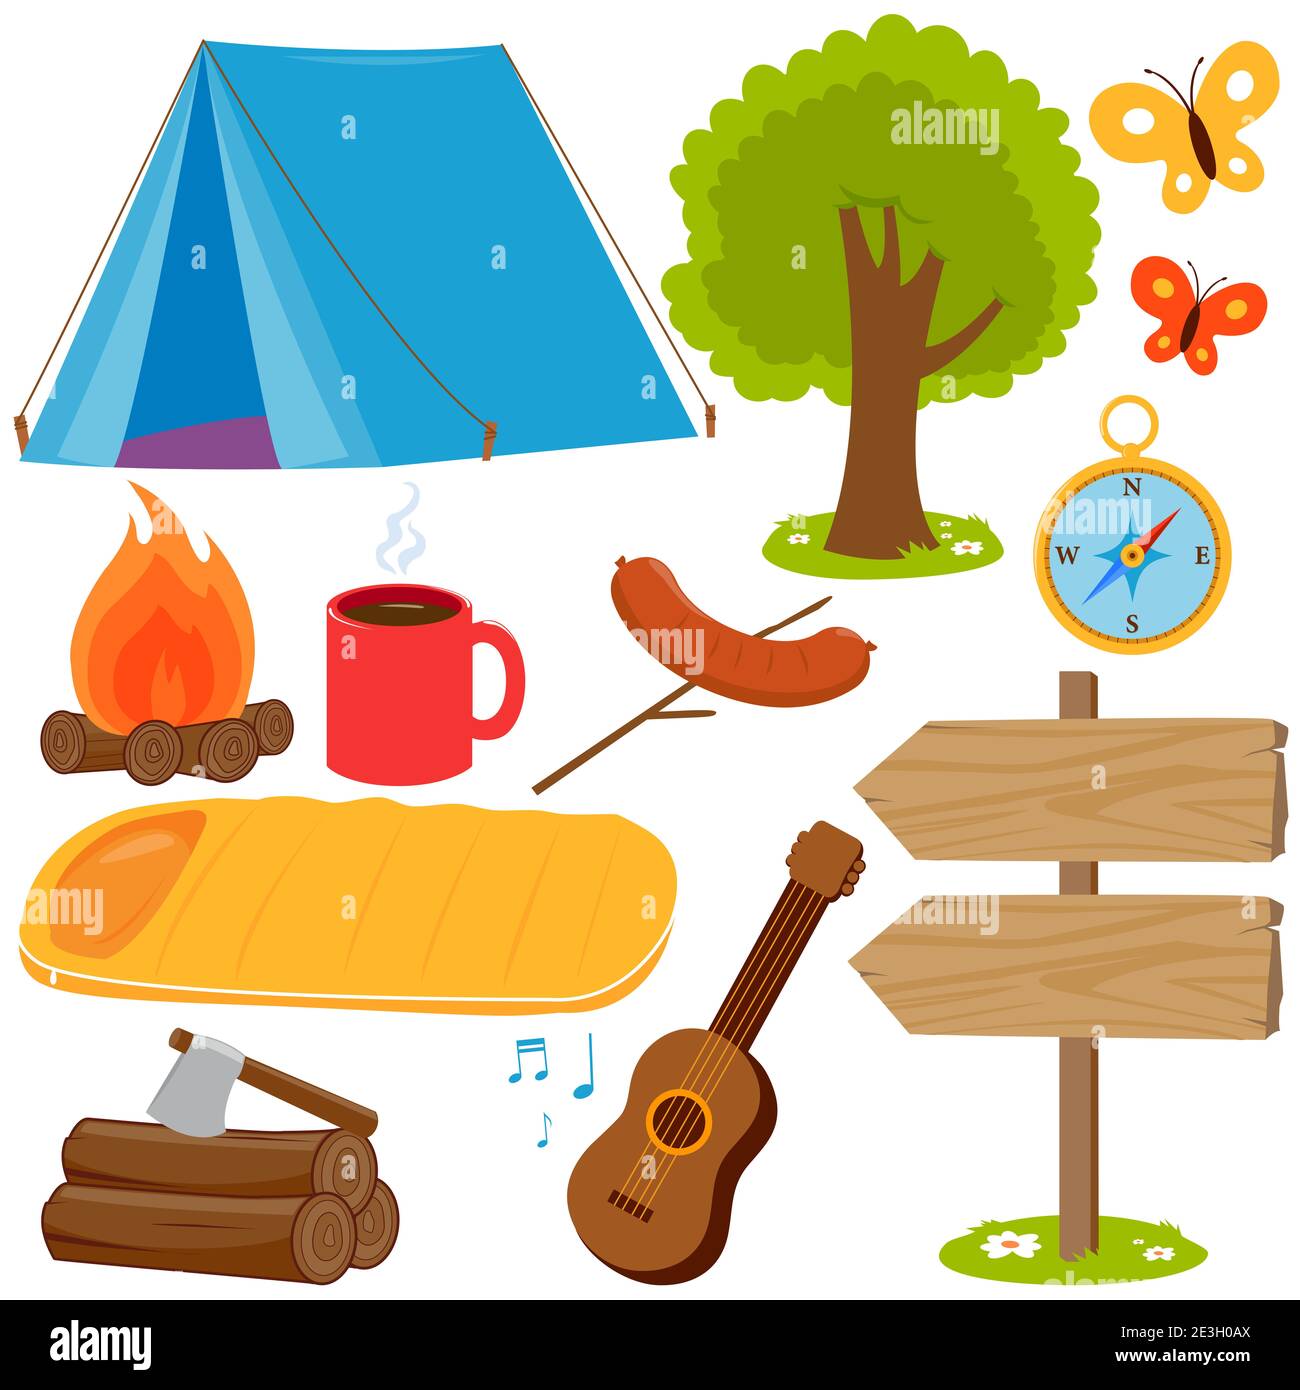 Camping objects and equipment collection. Illustration set Stock Photo -  Alamy